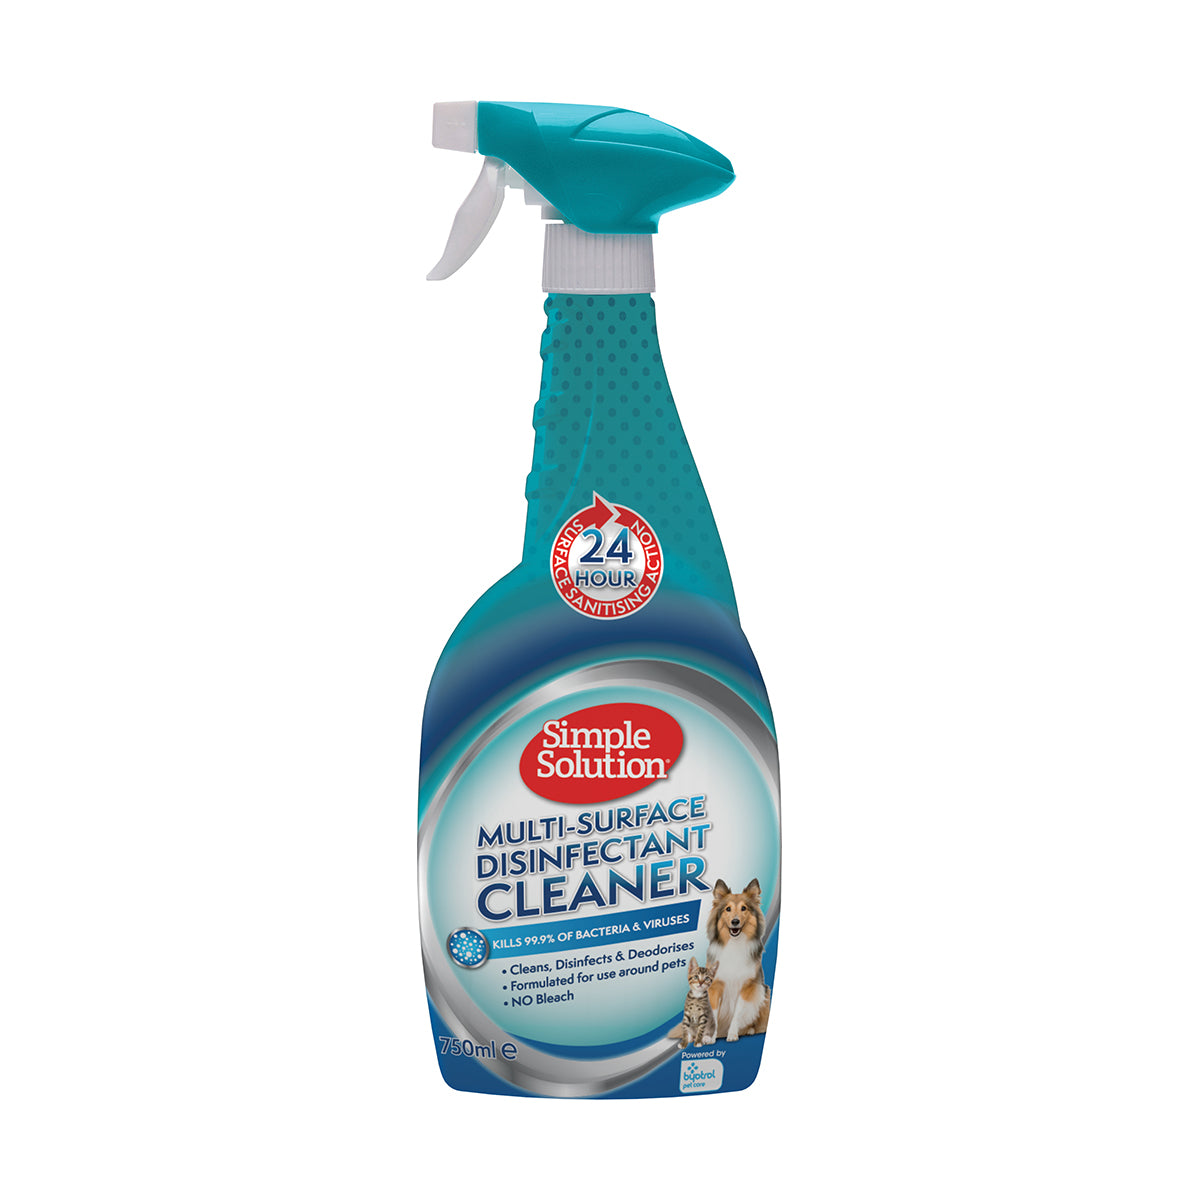 Simple Solution Multi-Surface Disinfectant Cleaner